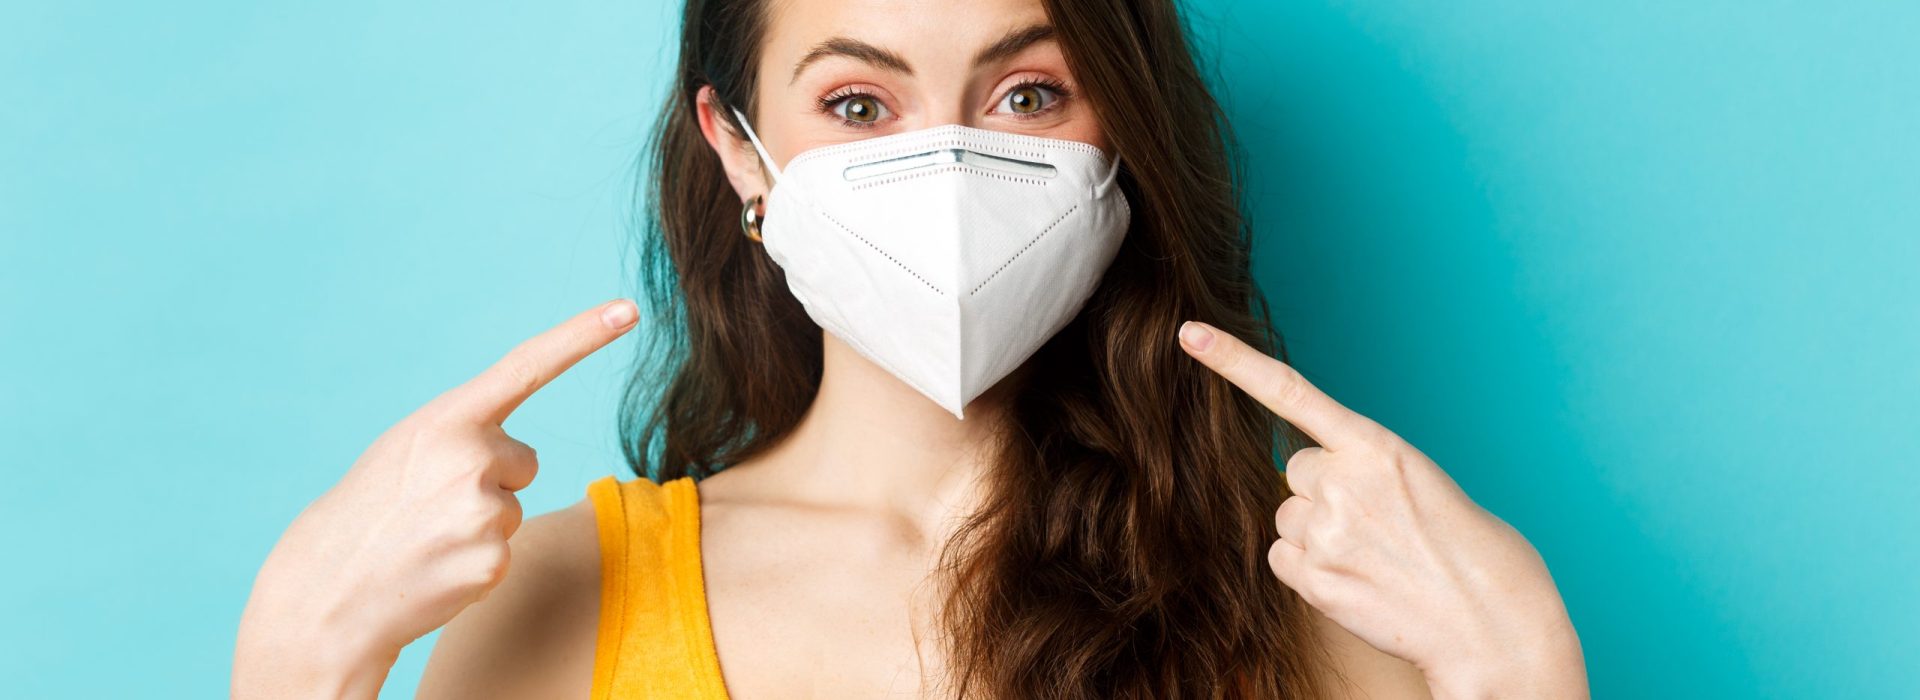 Covid-19, coronavirus and social distancing. Young woman in respirator pointing at her face, asking to use face masks during pandemic, standing against blue background.